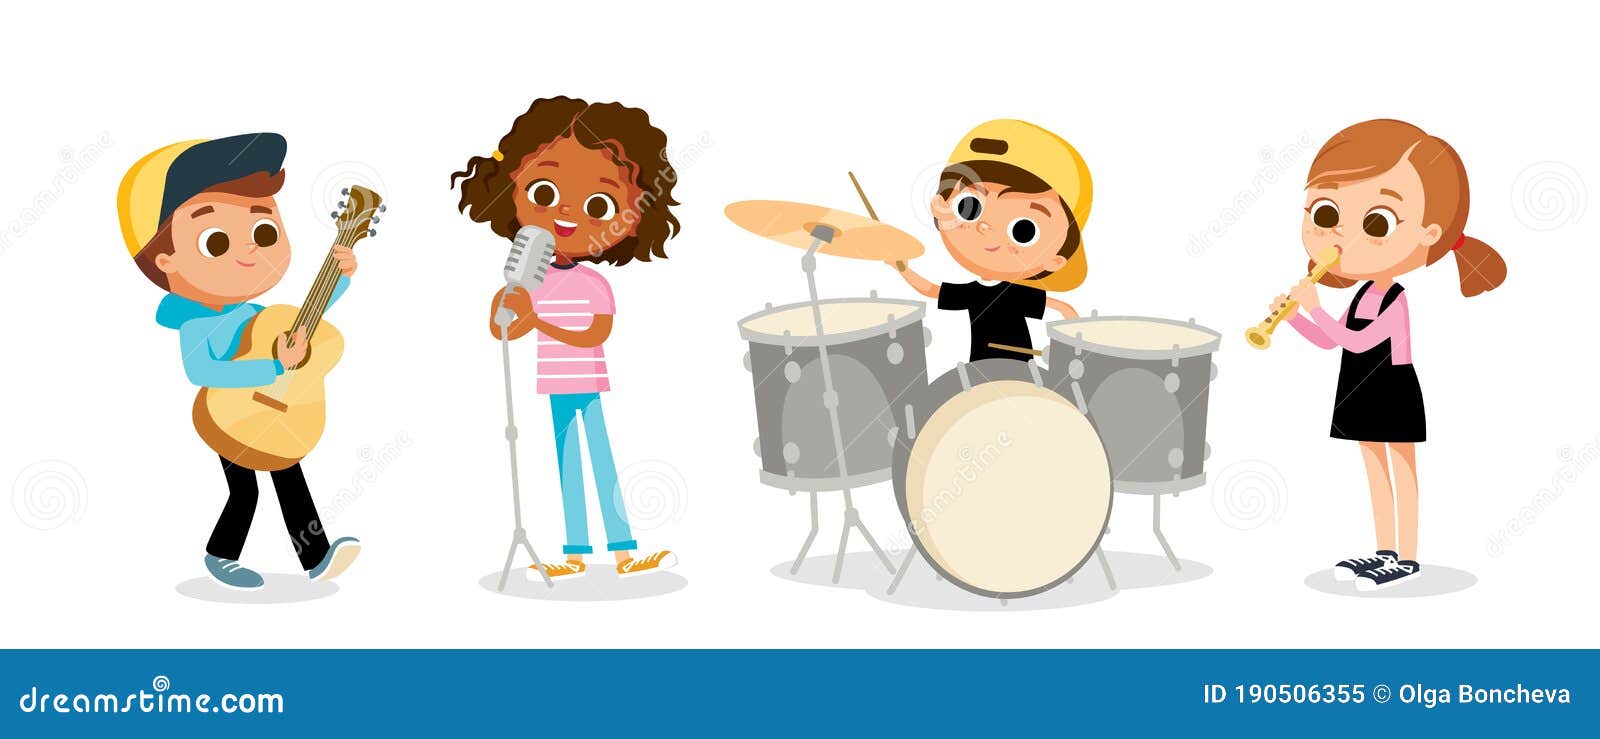 Child Music Band. Children Playing  Kids Playing Musical  Instruments Stock Vector - Illustration of microphone, band: 190506355